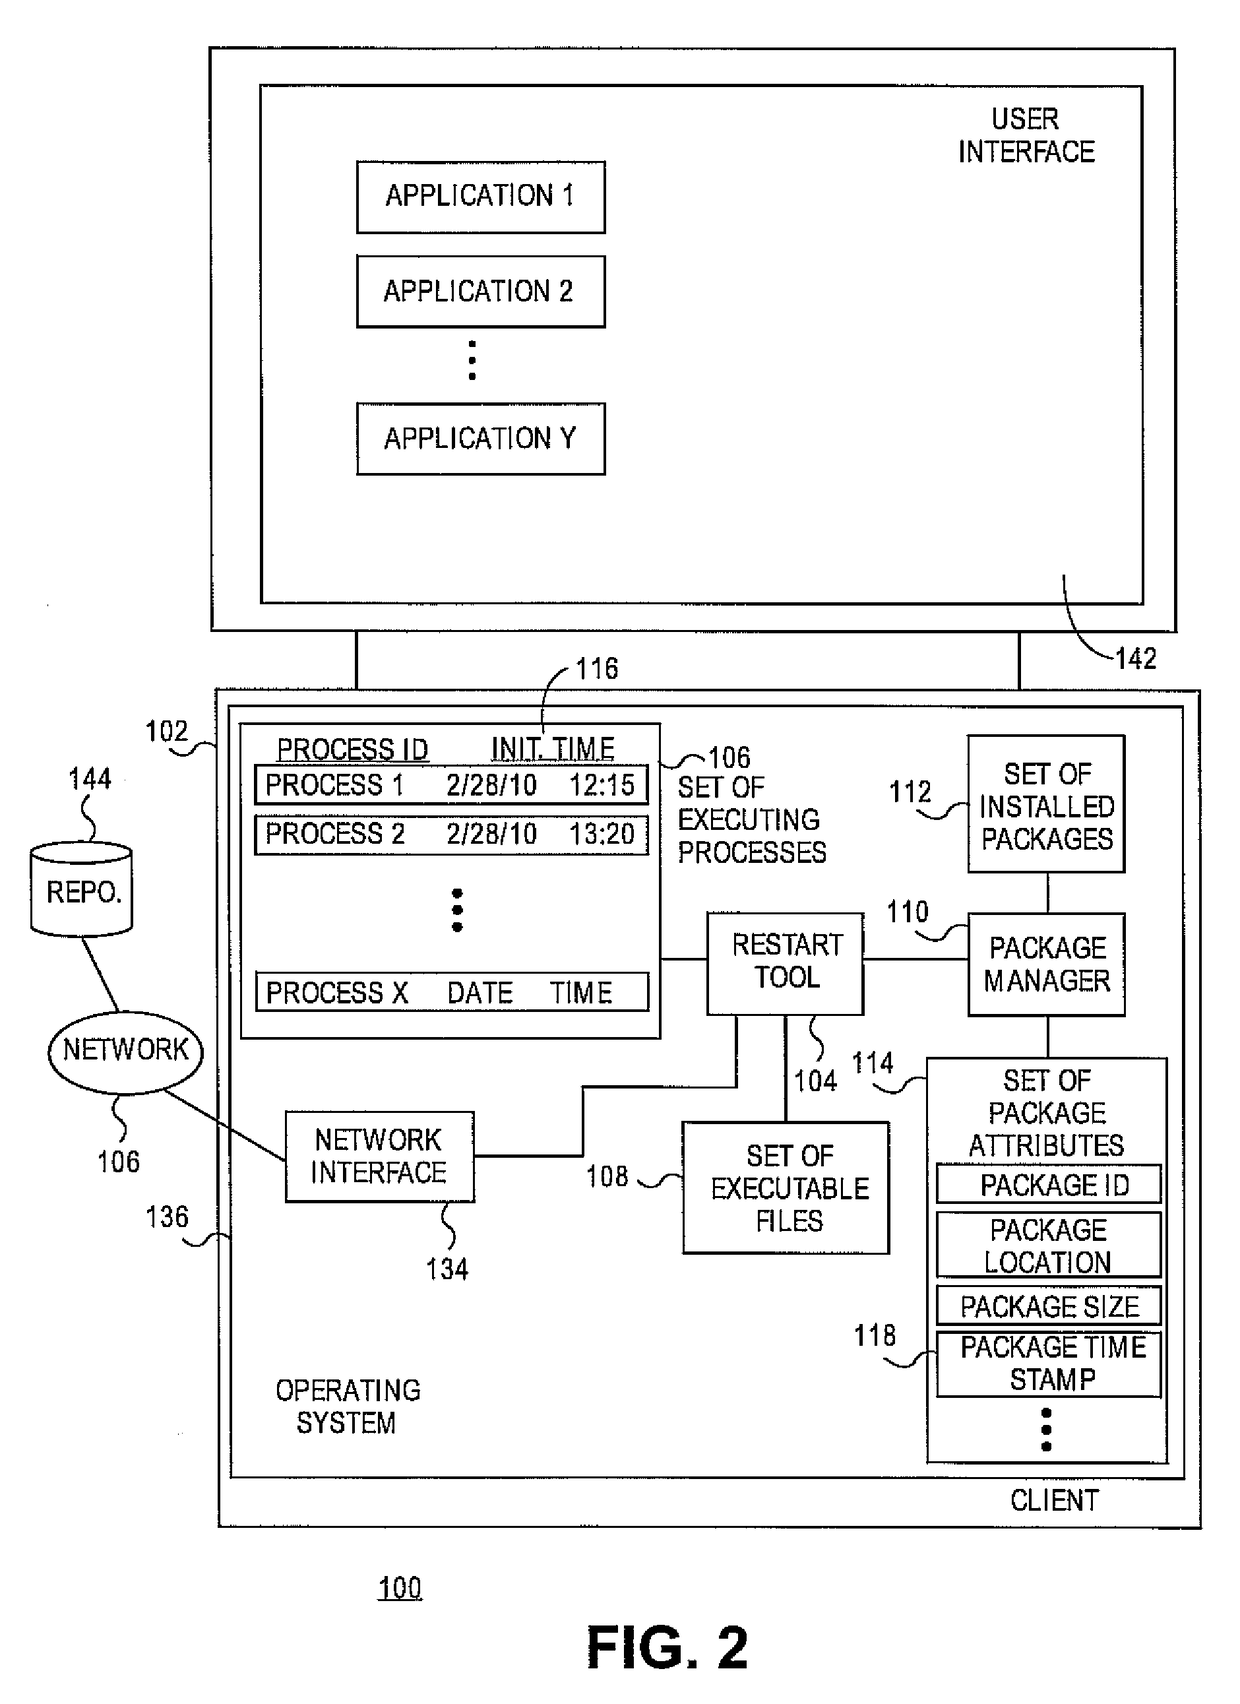 Detecting computing processes requiring reinitialization after a software package update